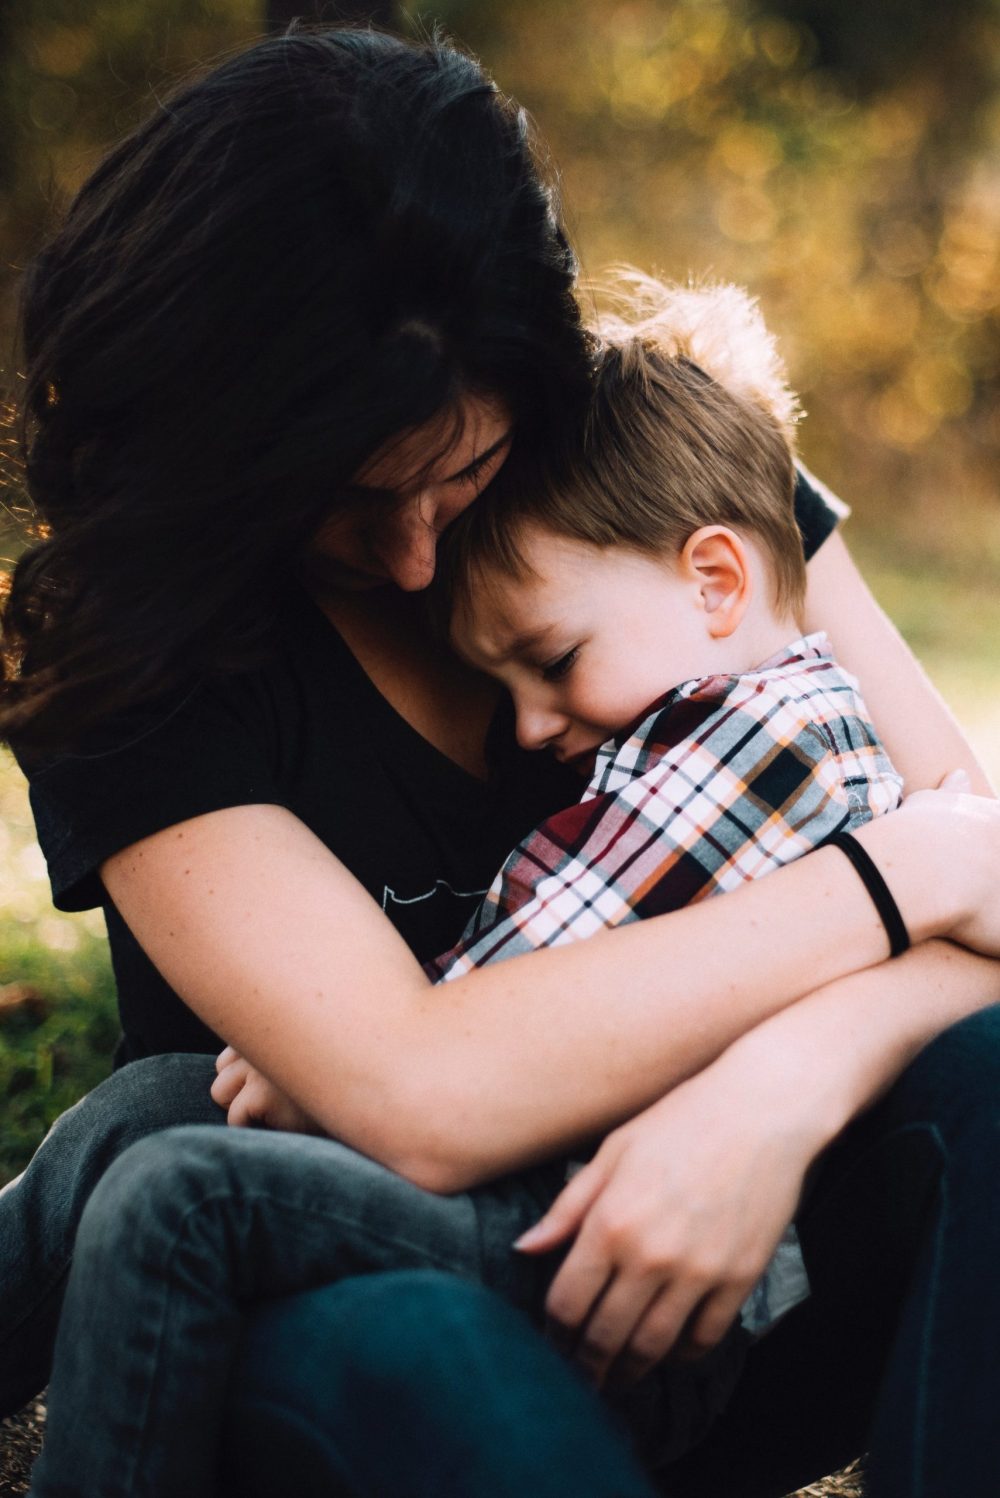 Mother’s Day Inspiration: 3 Care Management Lessons from Moms